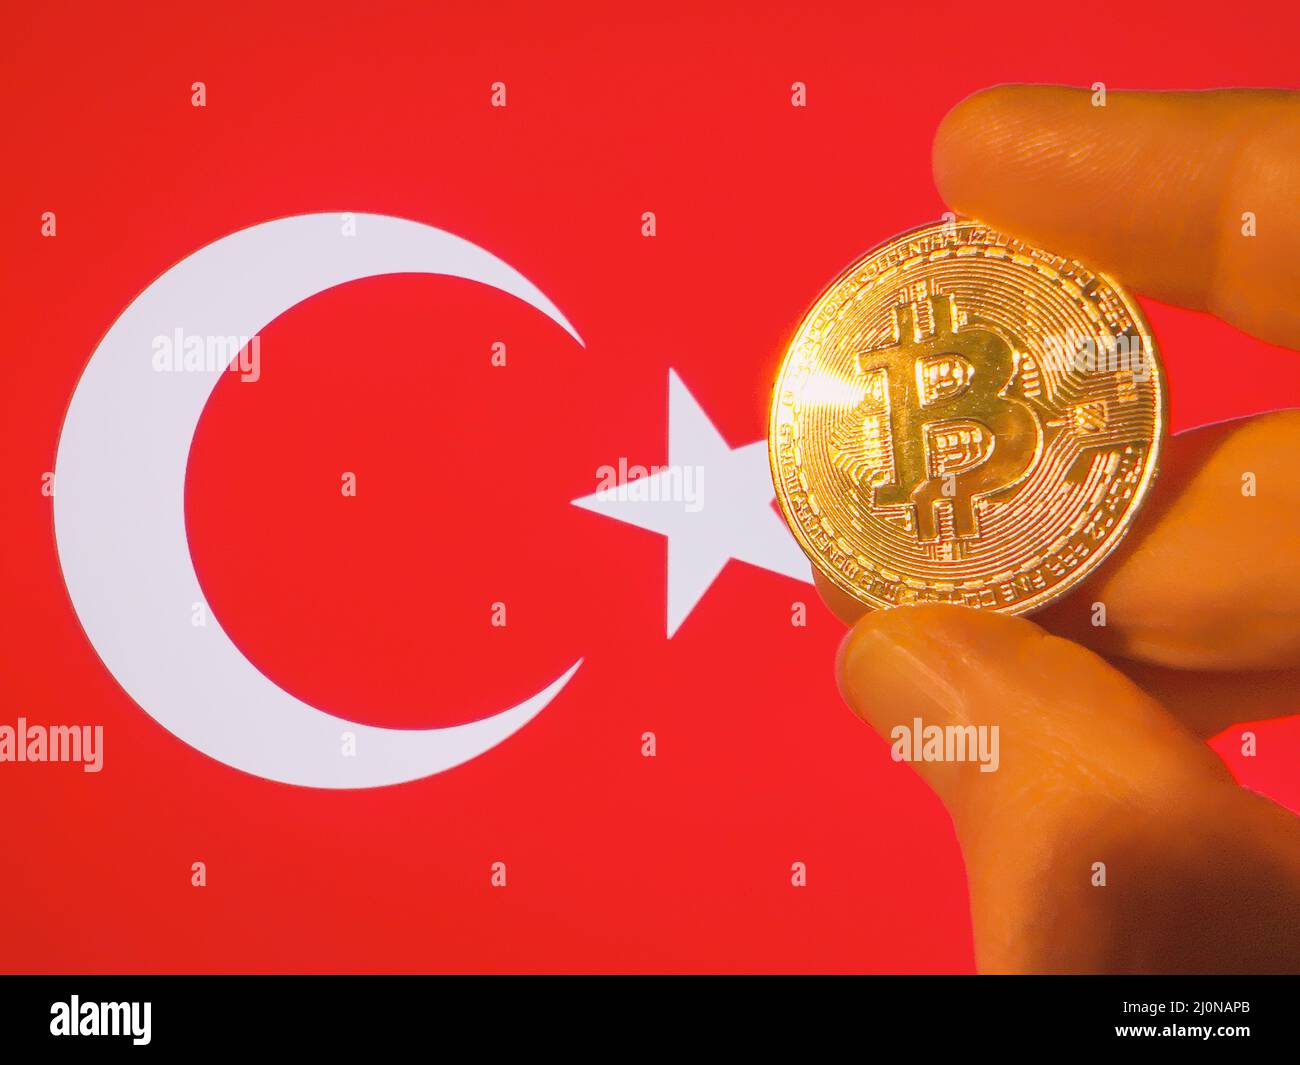 Holding a physical golden Bitcoin over the Turkish flag. Turkey  as cryptocurrency and blockchain technology investor. Financial background Stock Photo